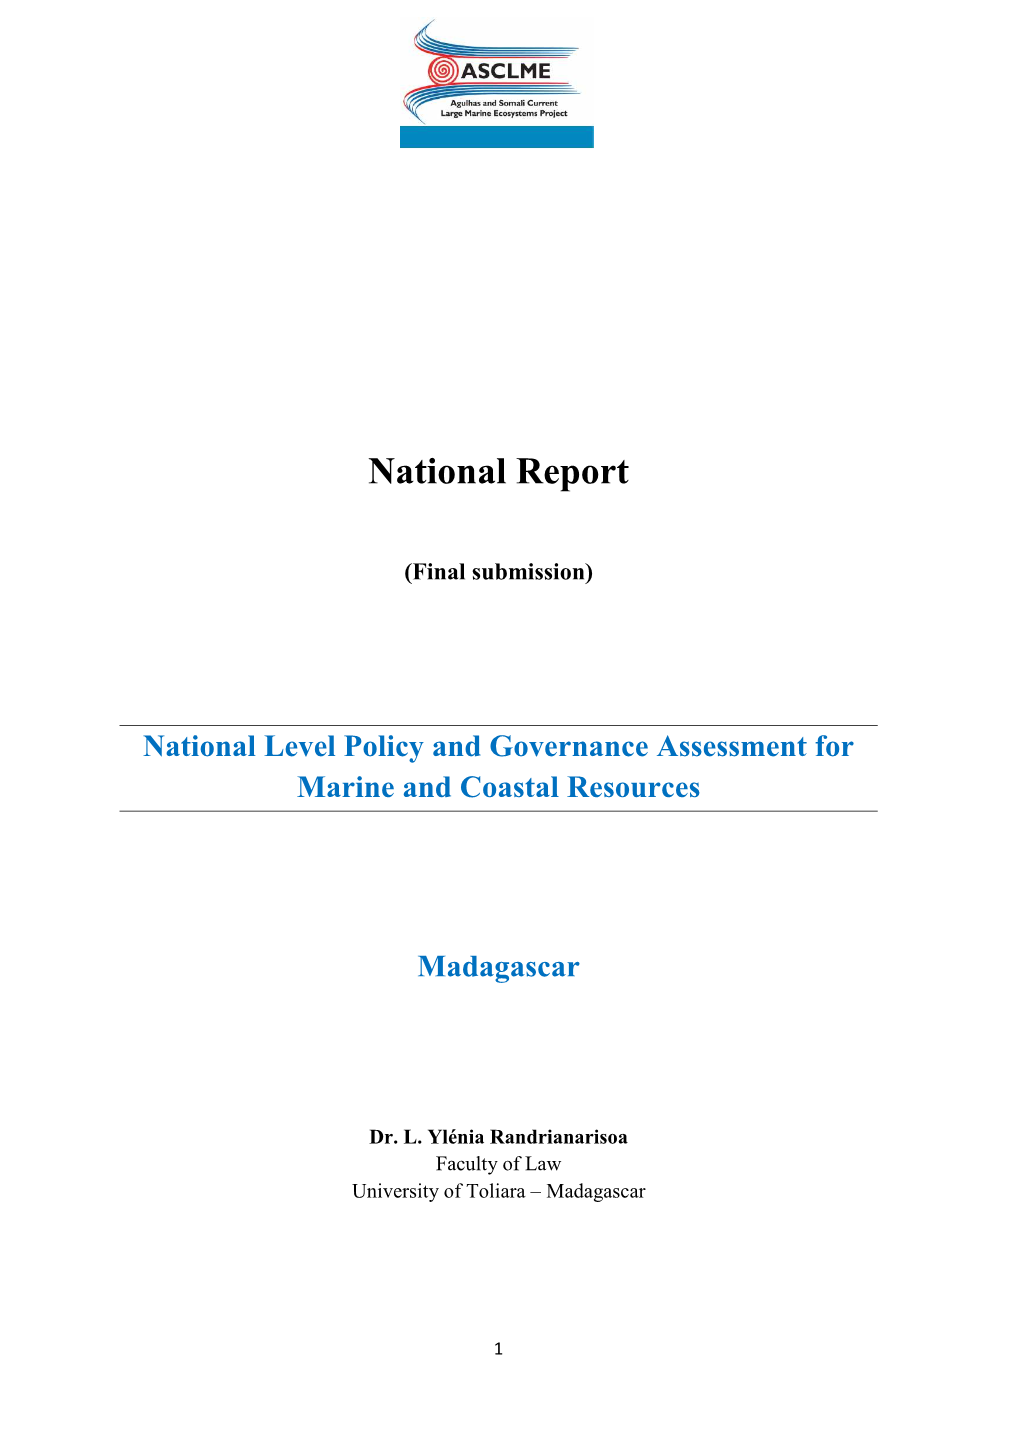 [ASCLME] Policy and Governance Assessment for Marine